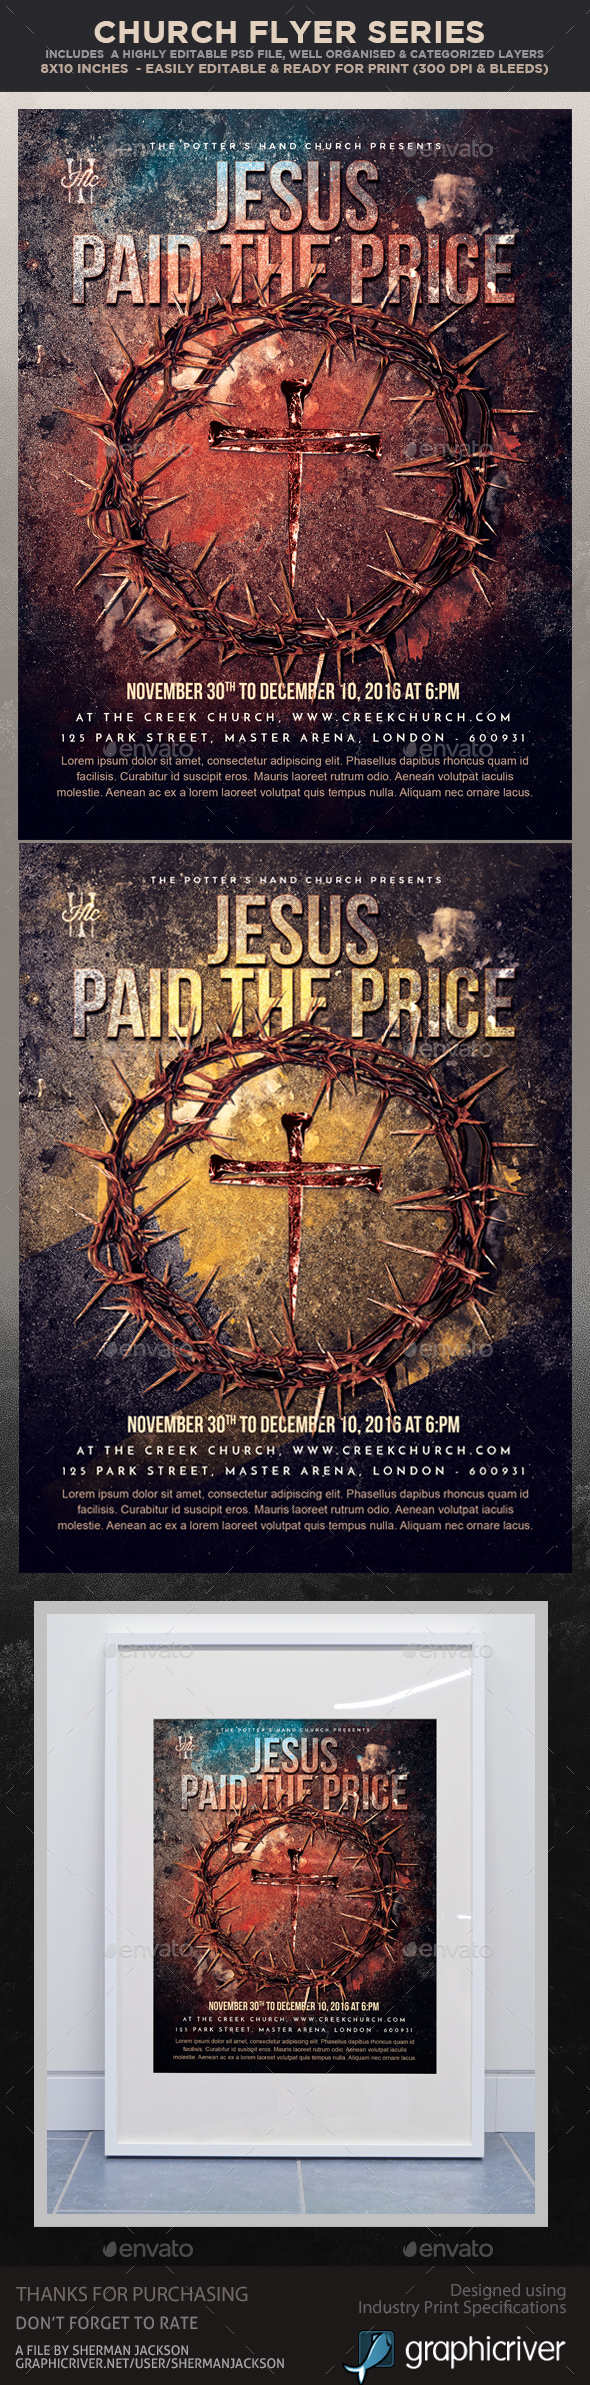 Church Themed Event Poster - Paid the Price